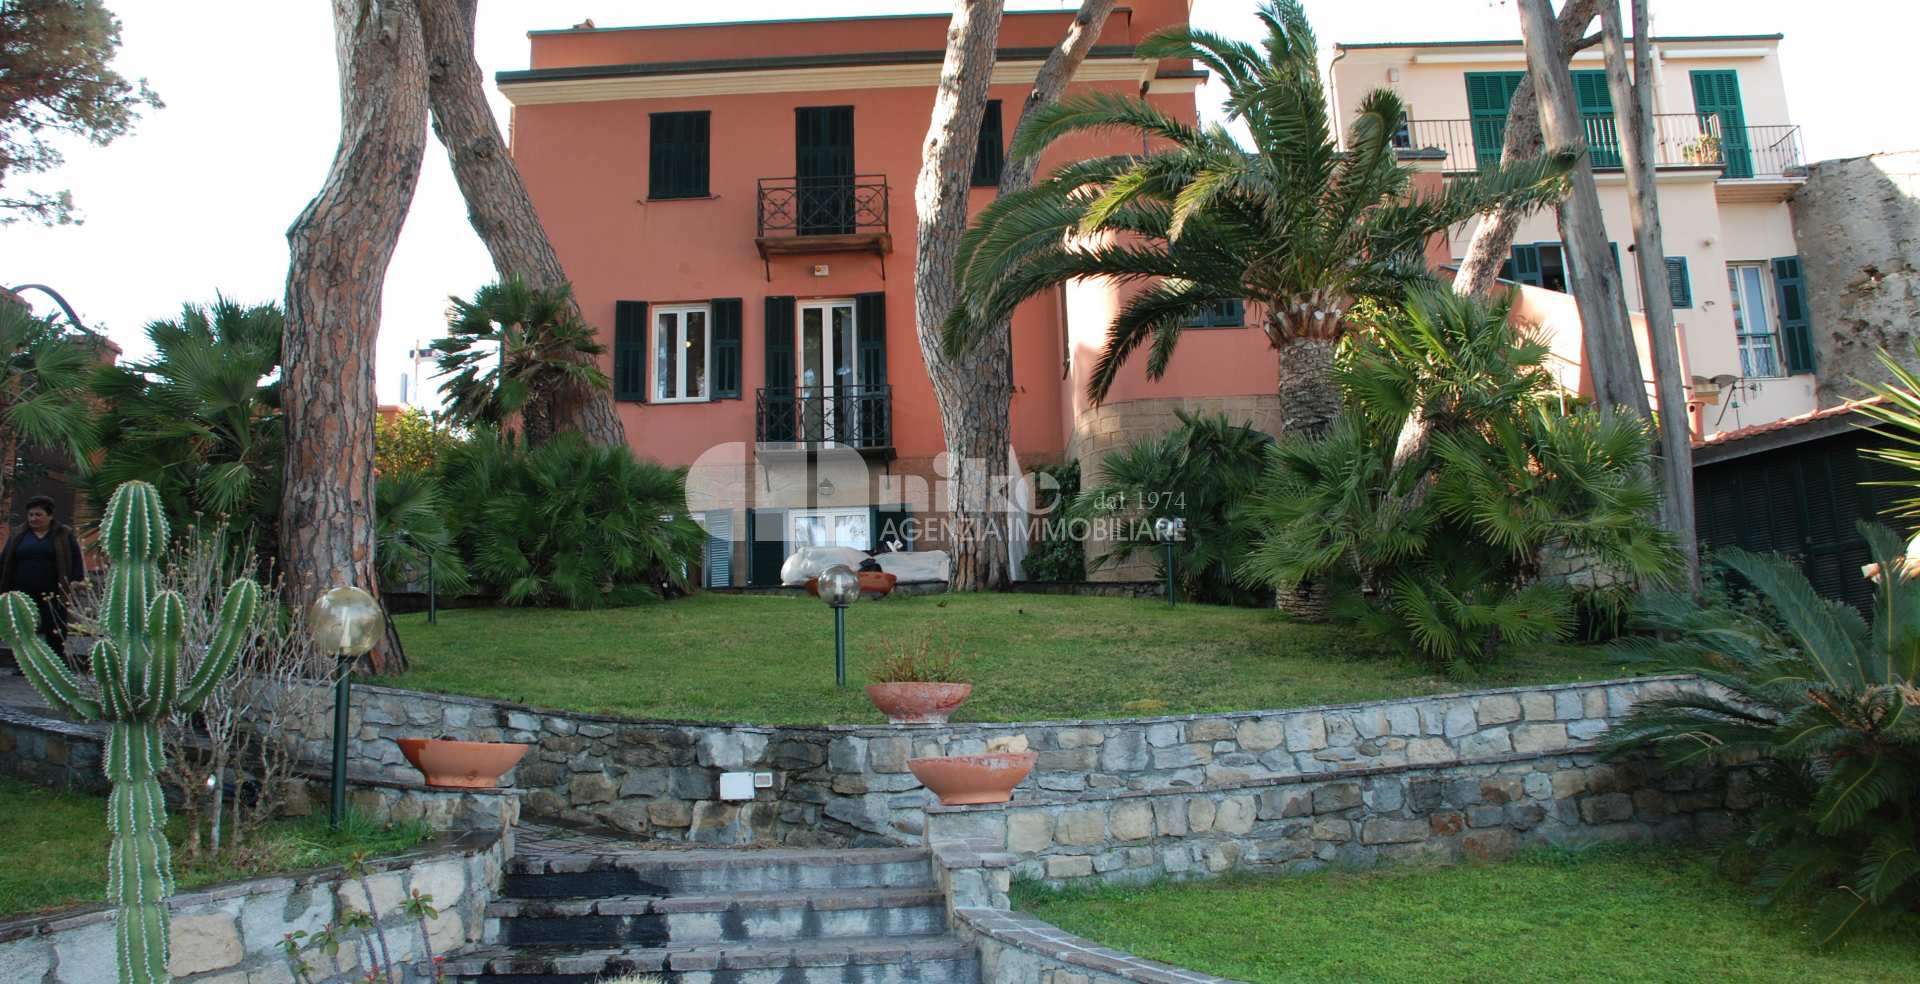 Storic residence facing the port